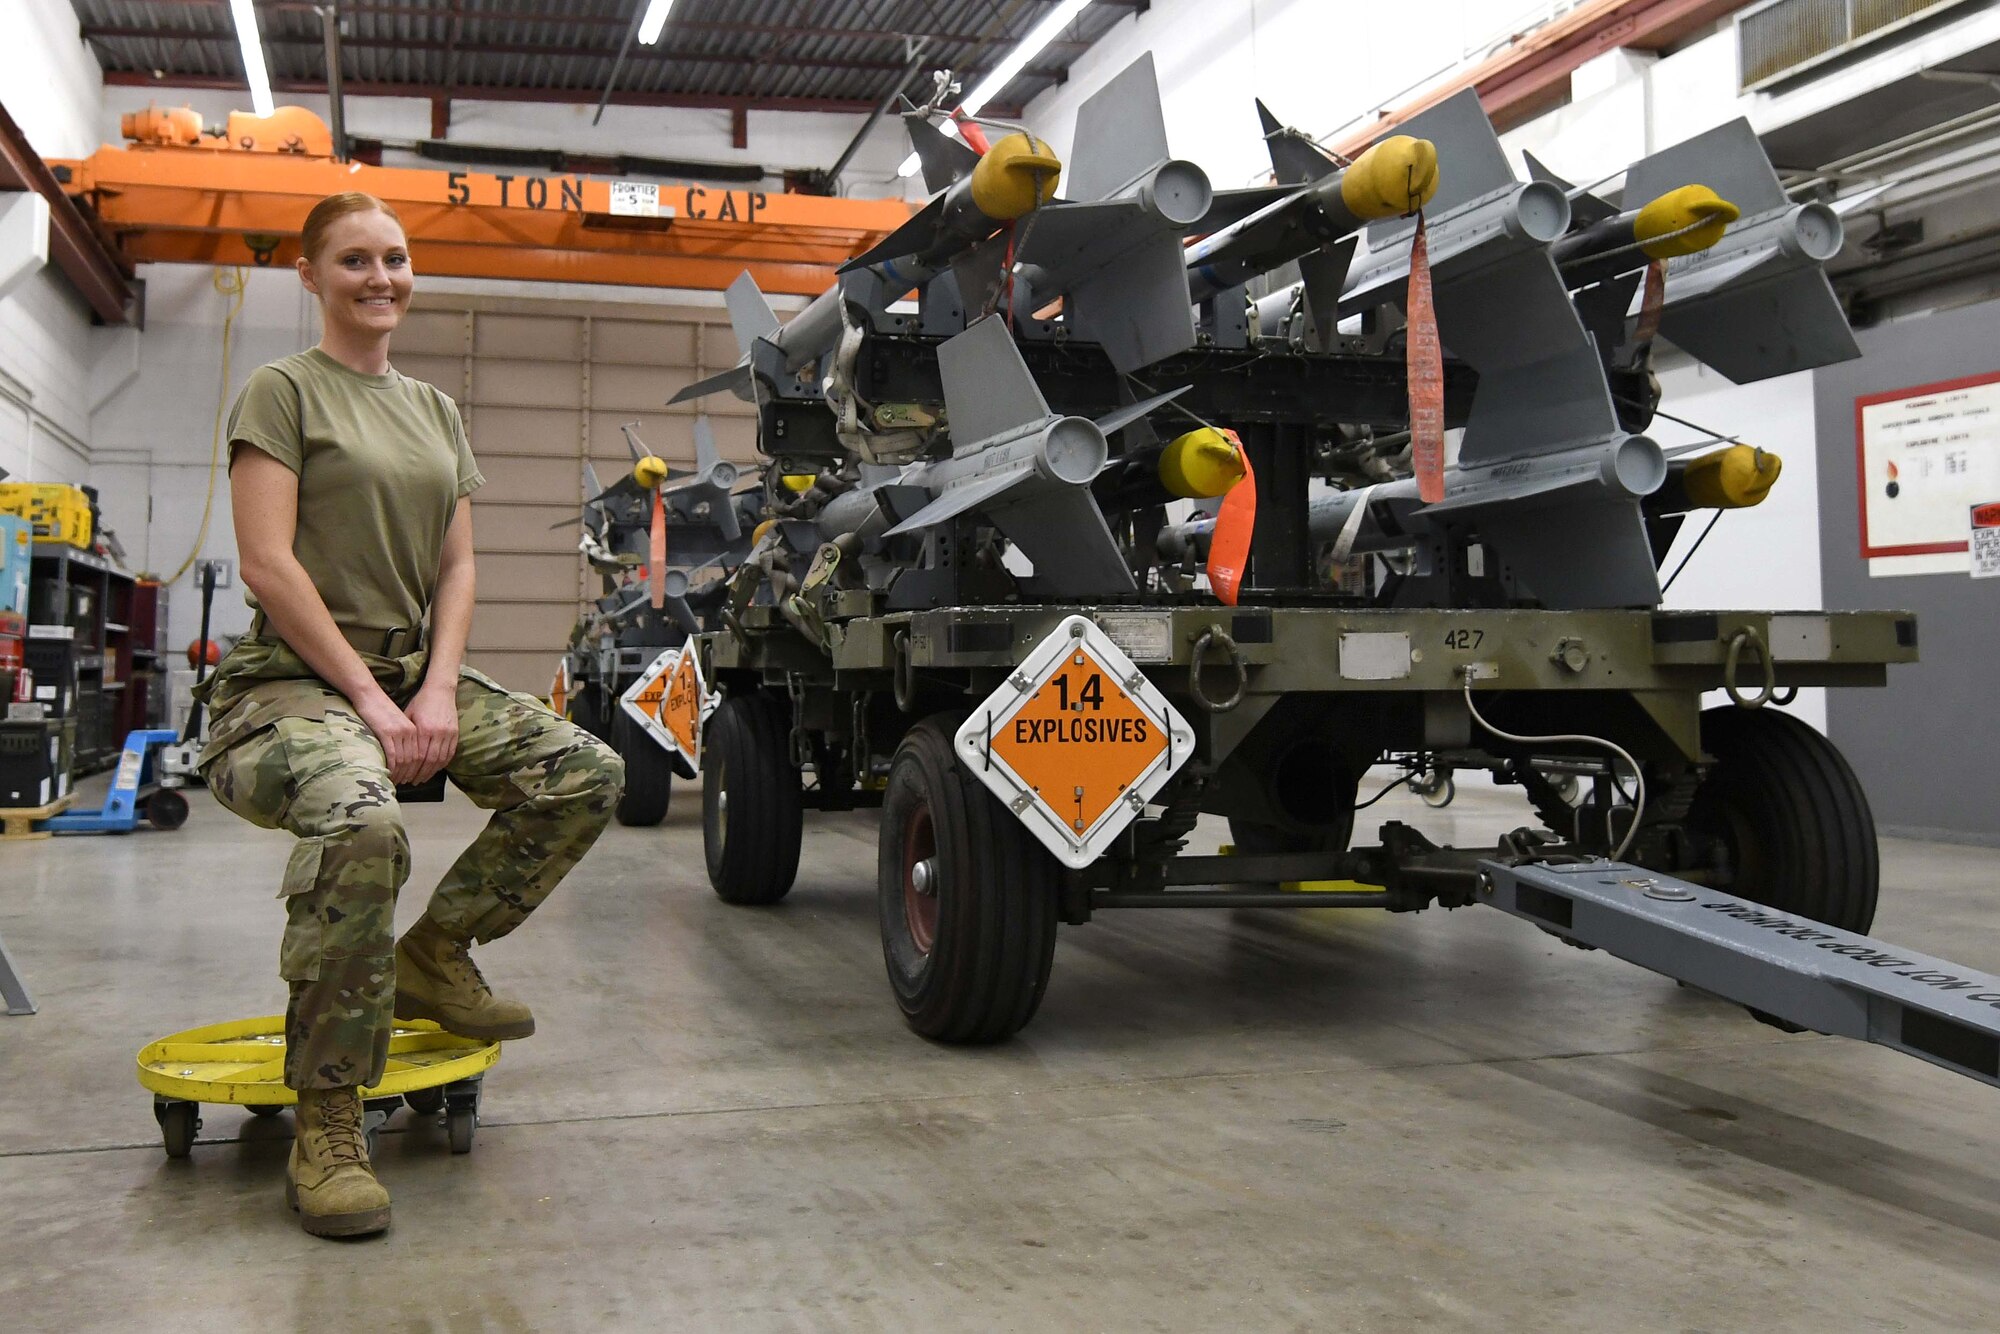 U.S. Air Force Staff Sgt. Kristy Riley, 924th Maintenance Squadron Munitions Flight combat plans training supervisor, poses for a photo at Davis-Monthan Air Force Base, Arizona, July 23, 2021. Riley was recently congratulated by Lt. Gen. Richard W. Scobee, chief of the Air Force Reserve and commander of Air Force Reserve Command, for becoming one of the Air Force’s 12 Outstanding Airmen of the Year. (U.S. Air Force photo by Staff Sgt. Blake Gonzales)